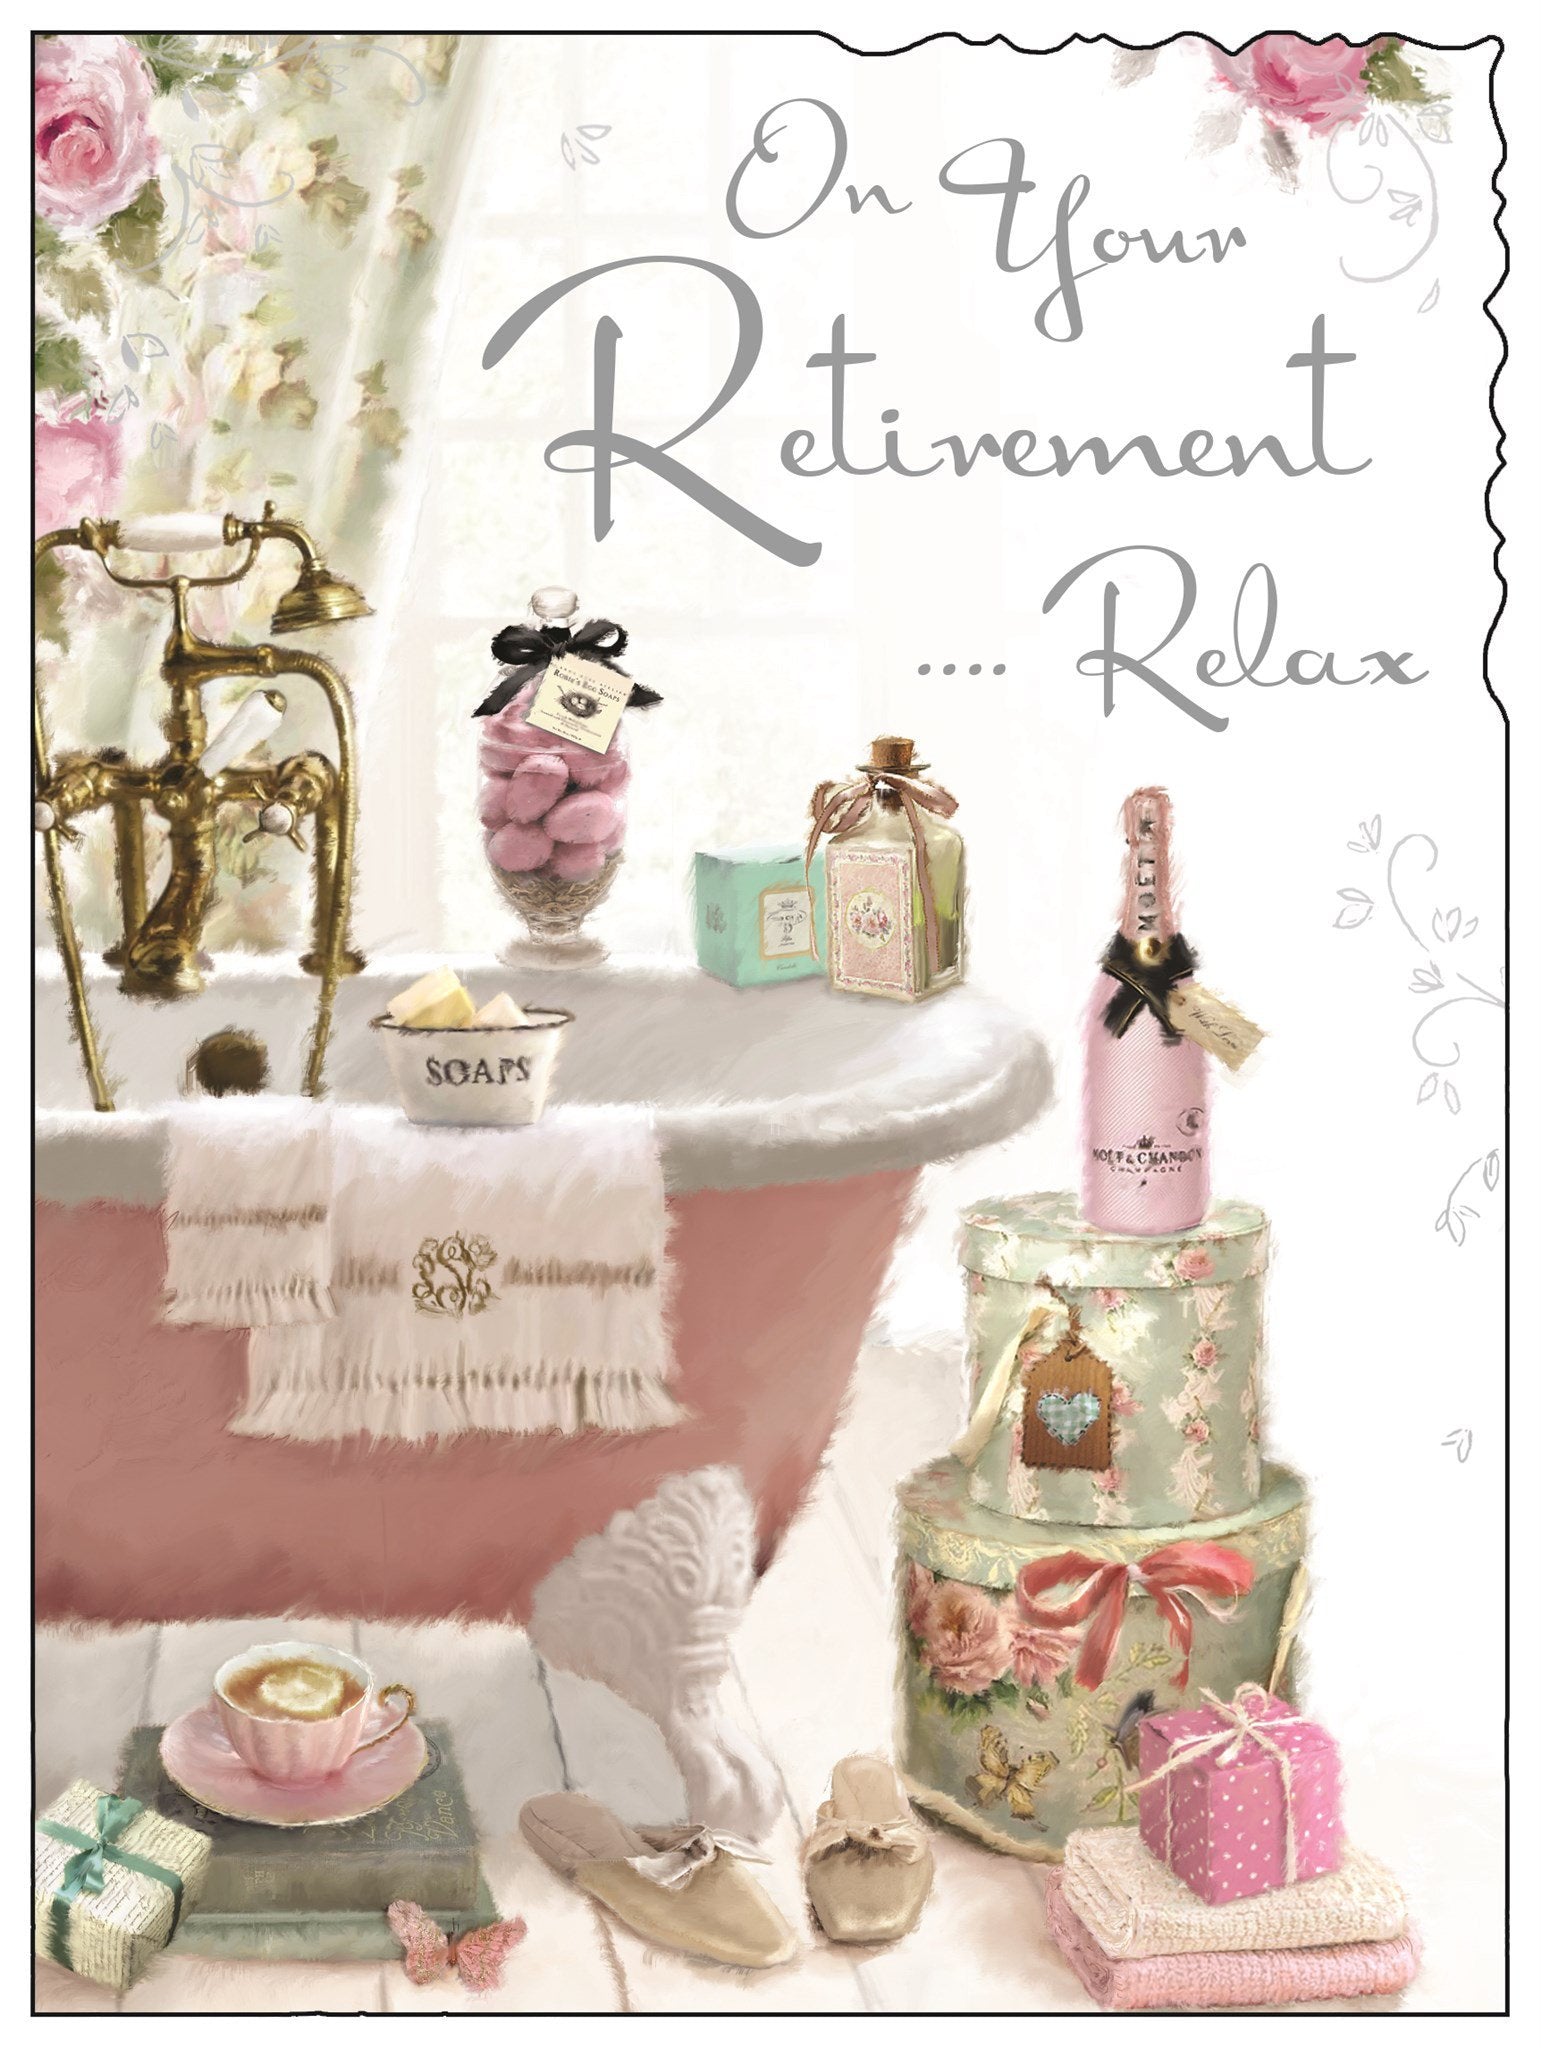 Front of Retirement Relax Bathroom Greetings Card